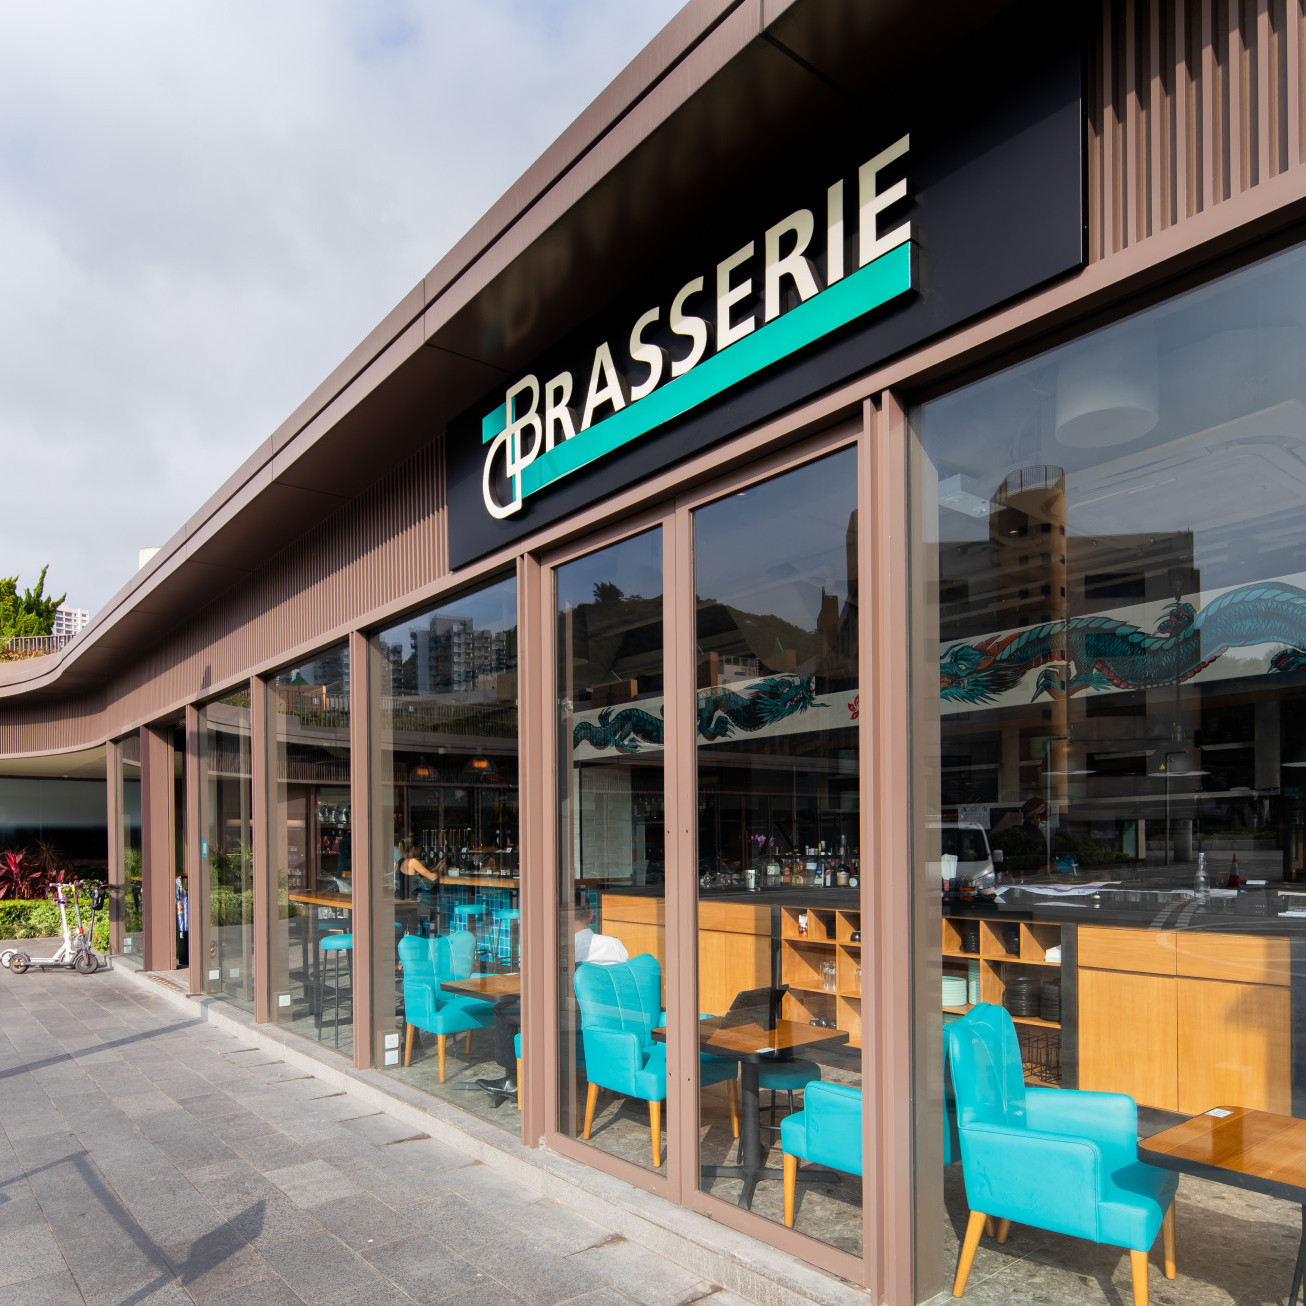 DBrassarie - Buy-one-get-one-free on any house beer, wine or spirits from Monday to Friday